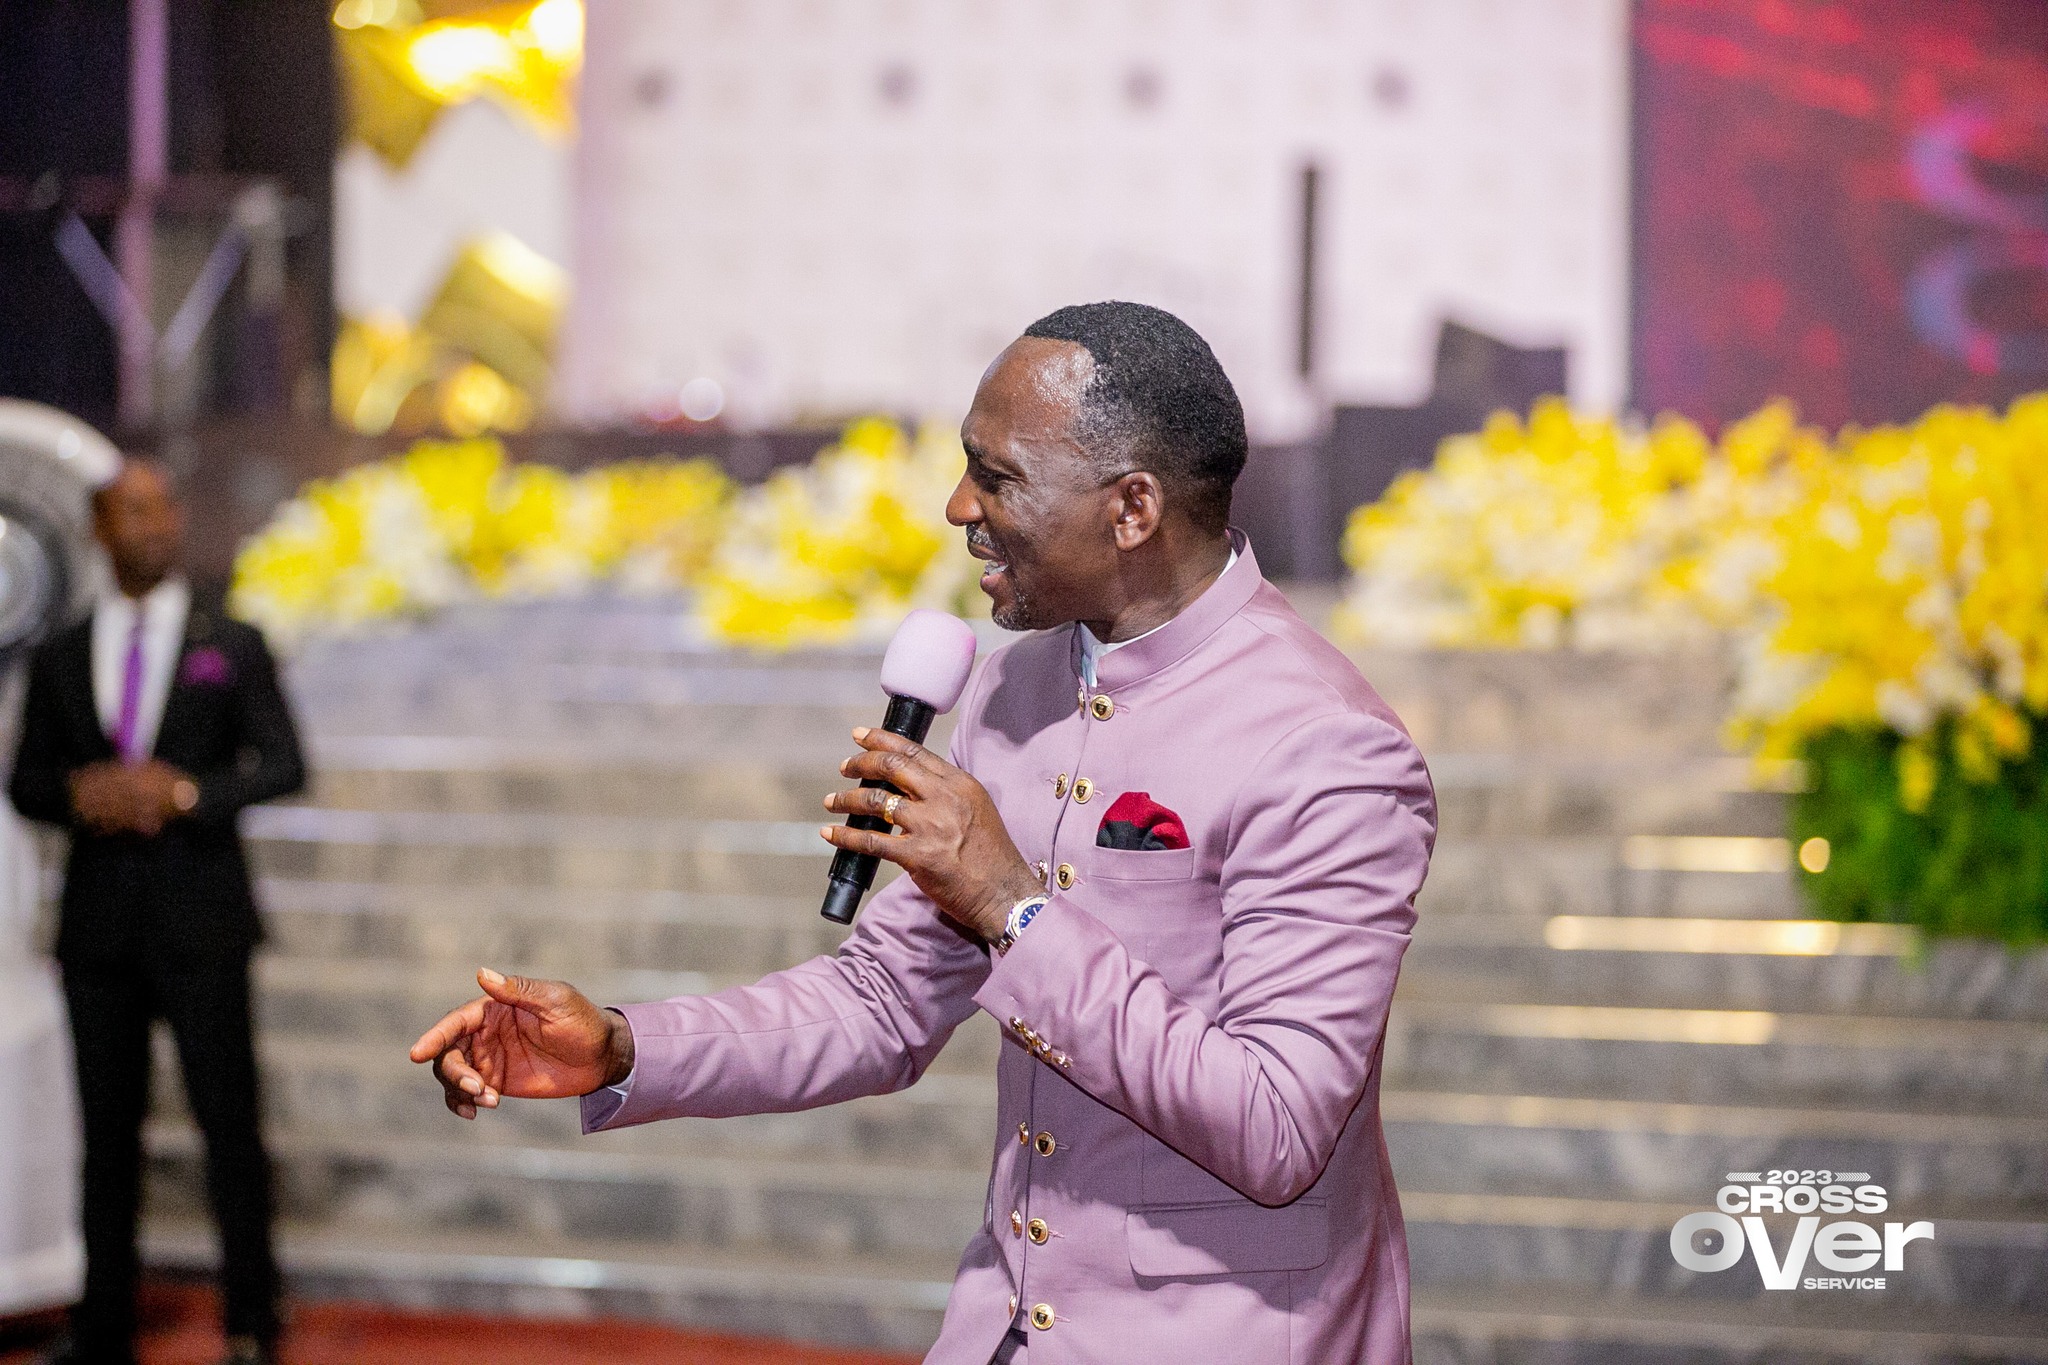 Entering The Land (Year) With Praise mp3 By Dr Paul Enenche